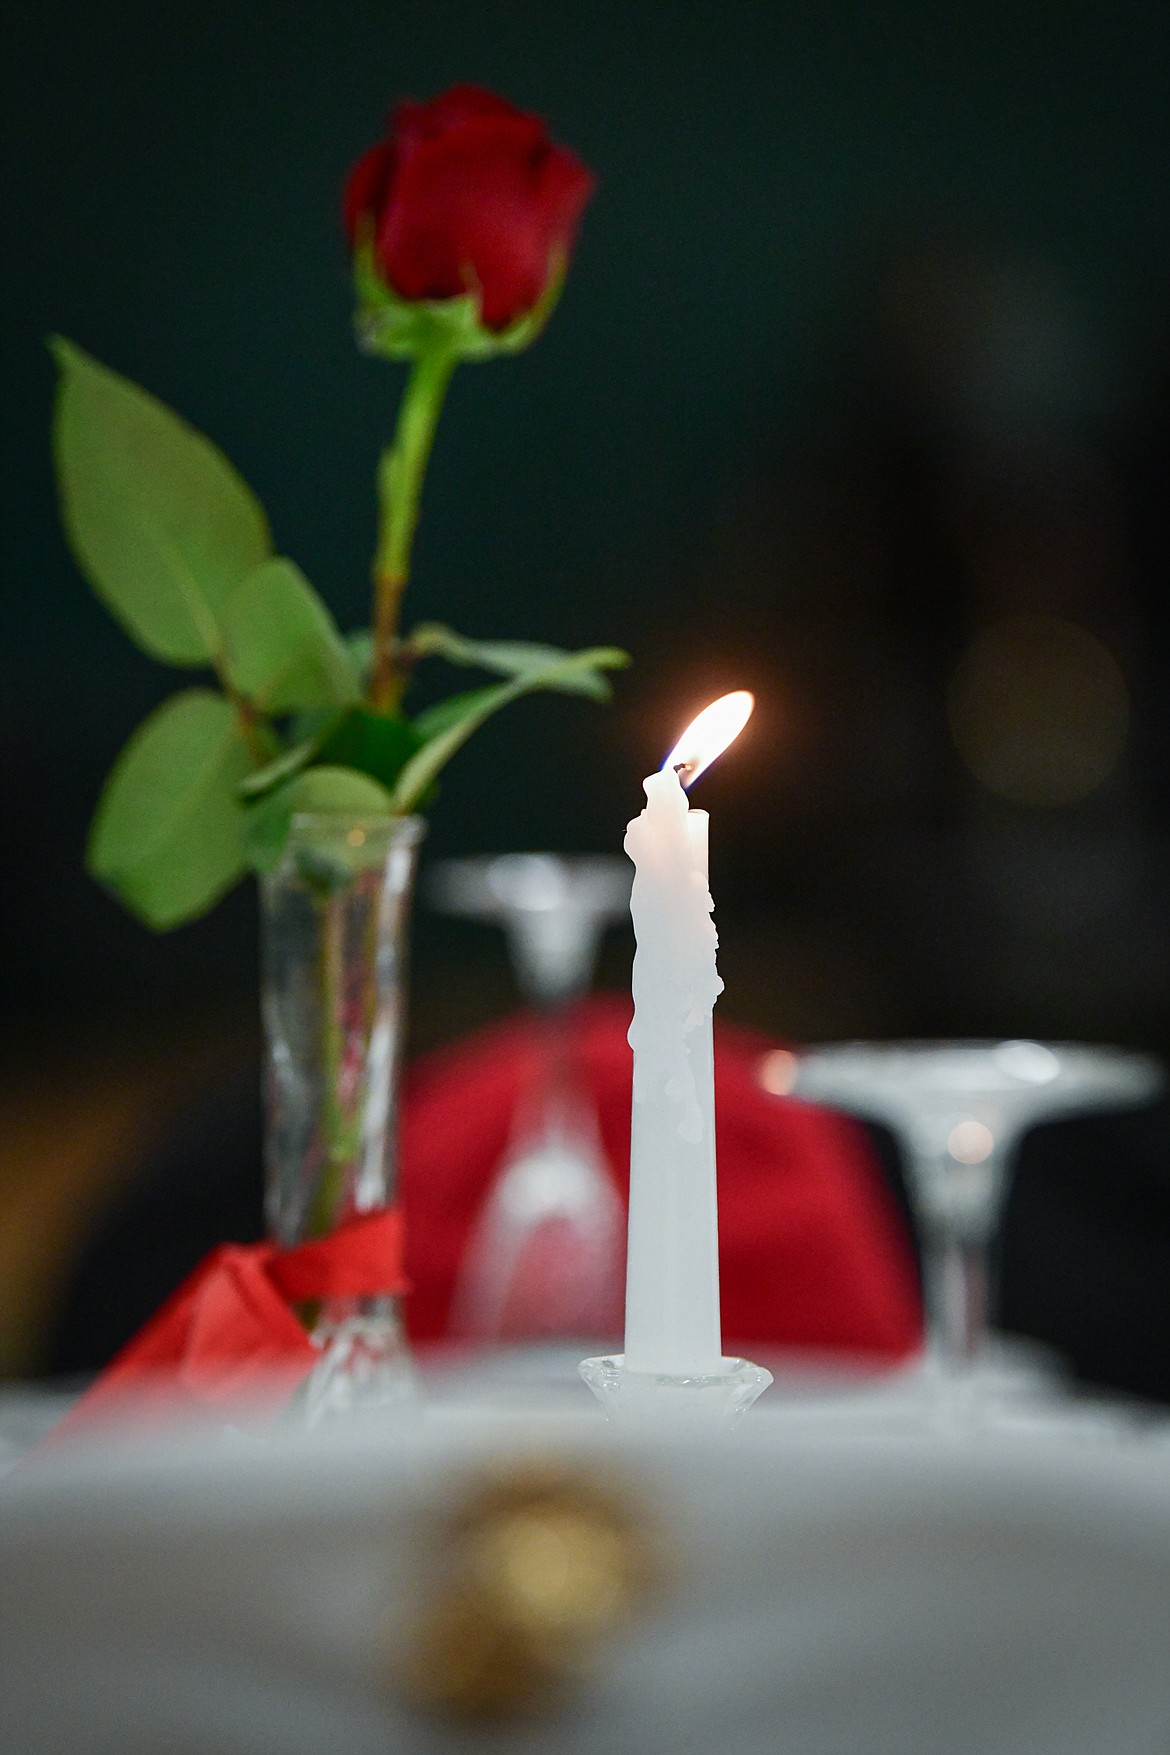 A candle and red rose sit  atop The Missing Man Table at the Veterans Day Community Event at Whitefish High School on Thursday, Nov. 9. The Missing Man Table was dedicated to the 359 servicemen still missing from the Battle of Tarawa, a three-day battle in November 1943 where 1,020 United States servicemembers lives were lost. The candle's flame and the rose serve as reminders of the lives of each of the missing and their loved ones who keep the faith. (Casey Kreider/Daily Inter Lake)